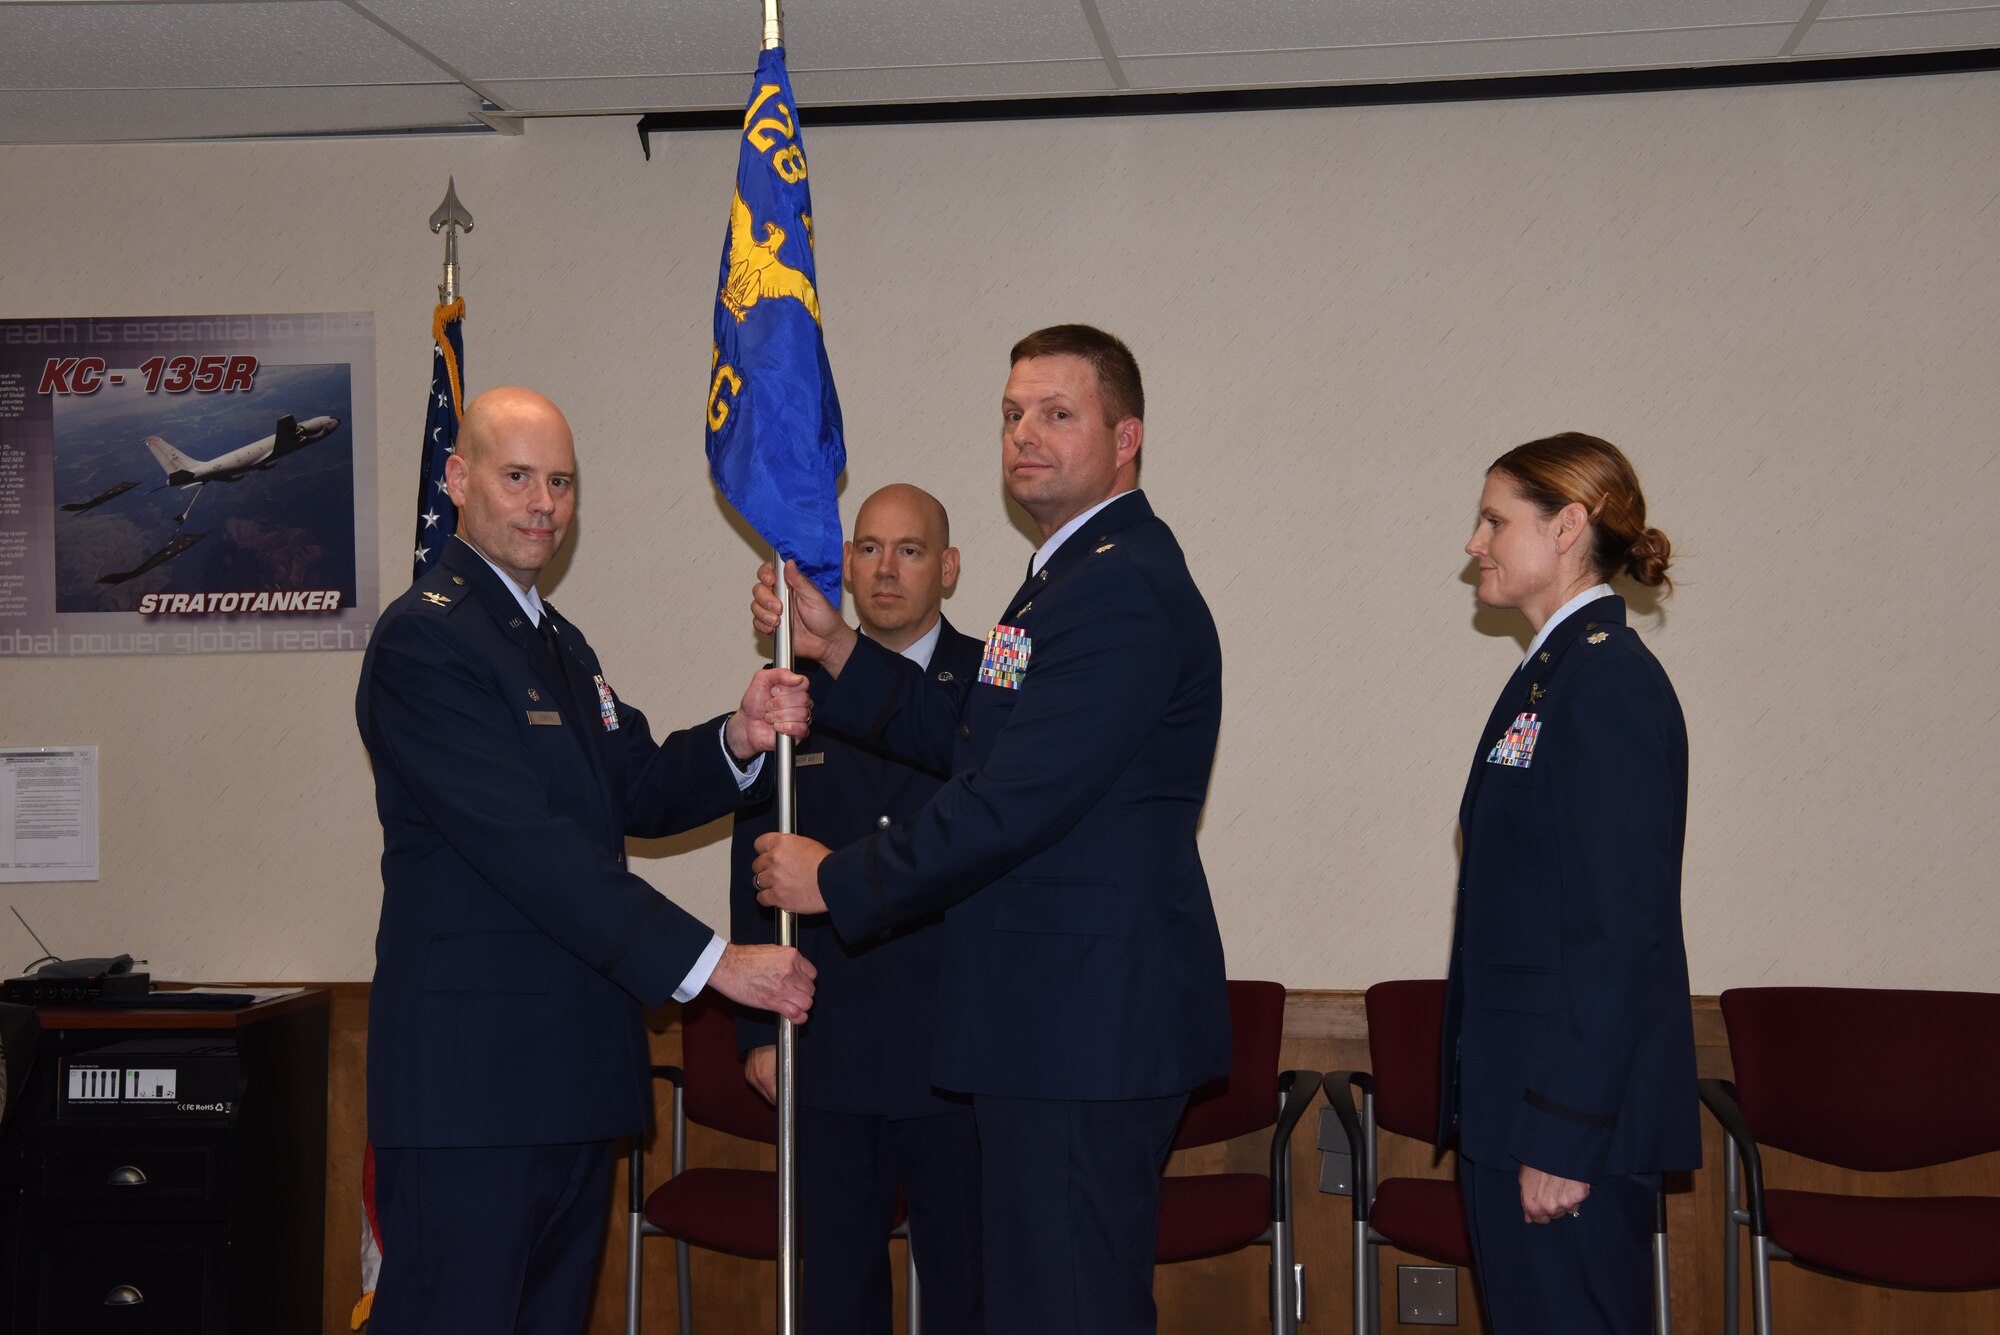 Lieutenant Col. Thomas Mielcarek relinquishes command of the 128th Communications Flight during a change of command ceremony October 6, 2019, at the 128th Air Refueling Wing, Wisc. Mielcarek served as Commander for more than twelve years and led the 128 CF through significant operational changes over his tenure.